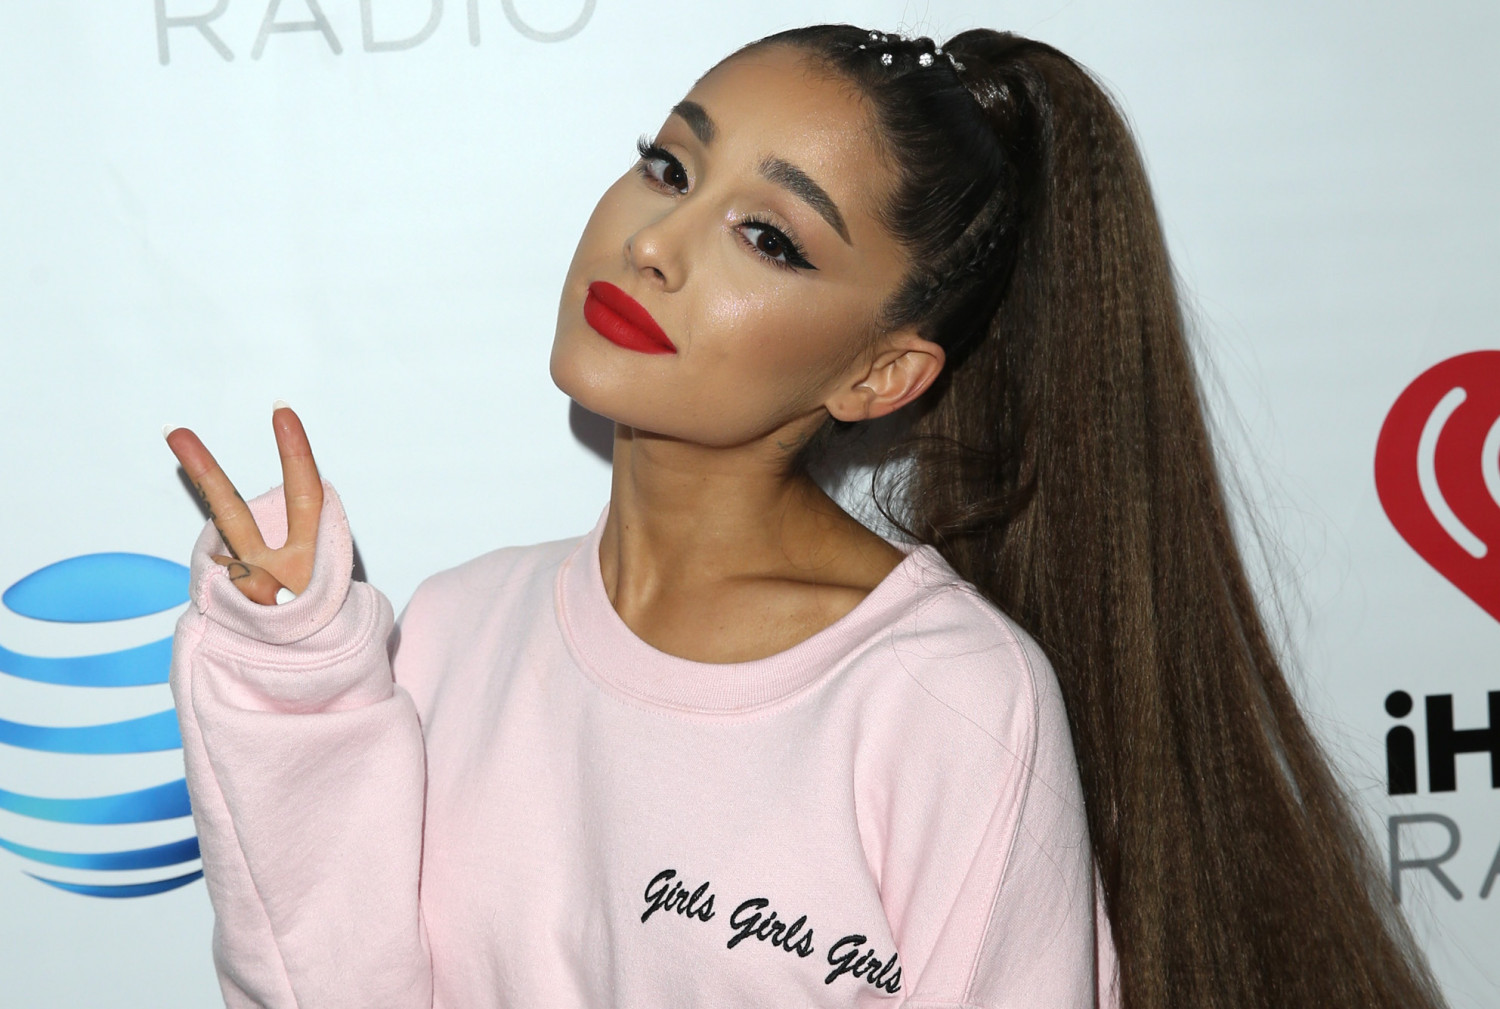 Ariana Grande Responds to Reported Million-Dollar Offer to Remove Misspelled Tattoo